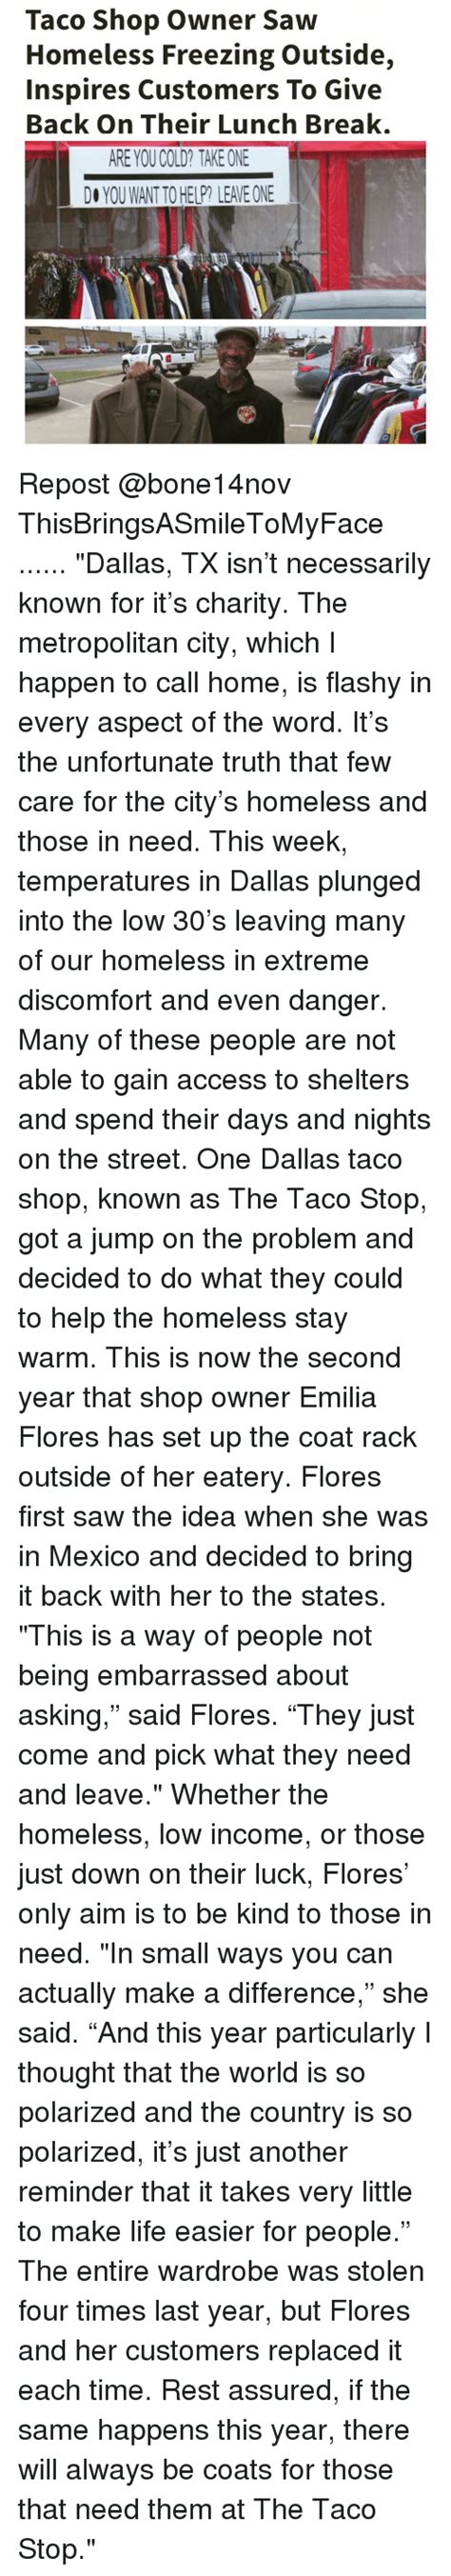 Taco Shop Owner Saw Homeless Freezing Outside Inspires